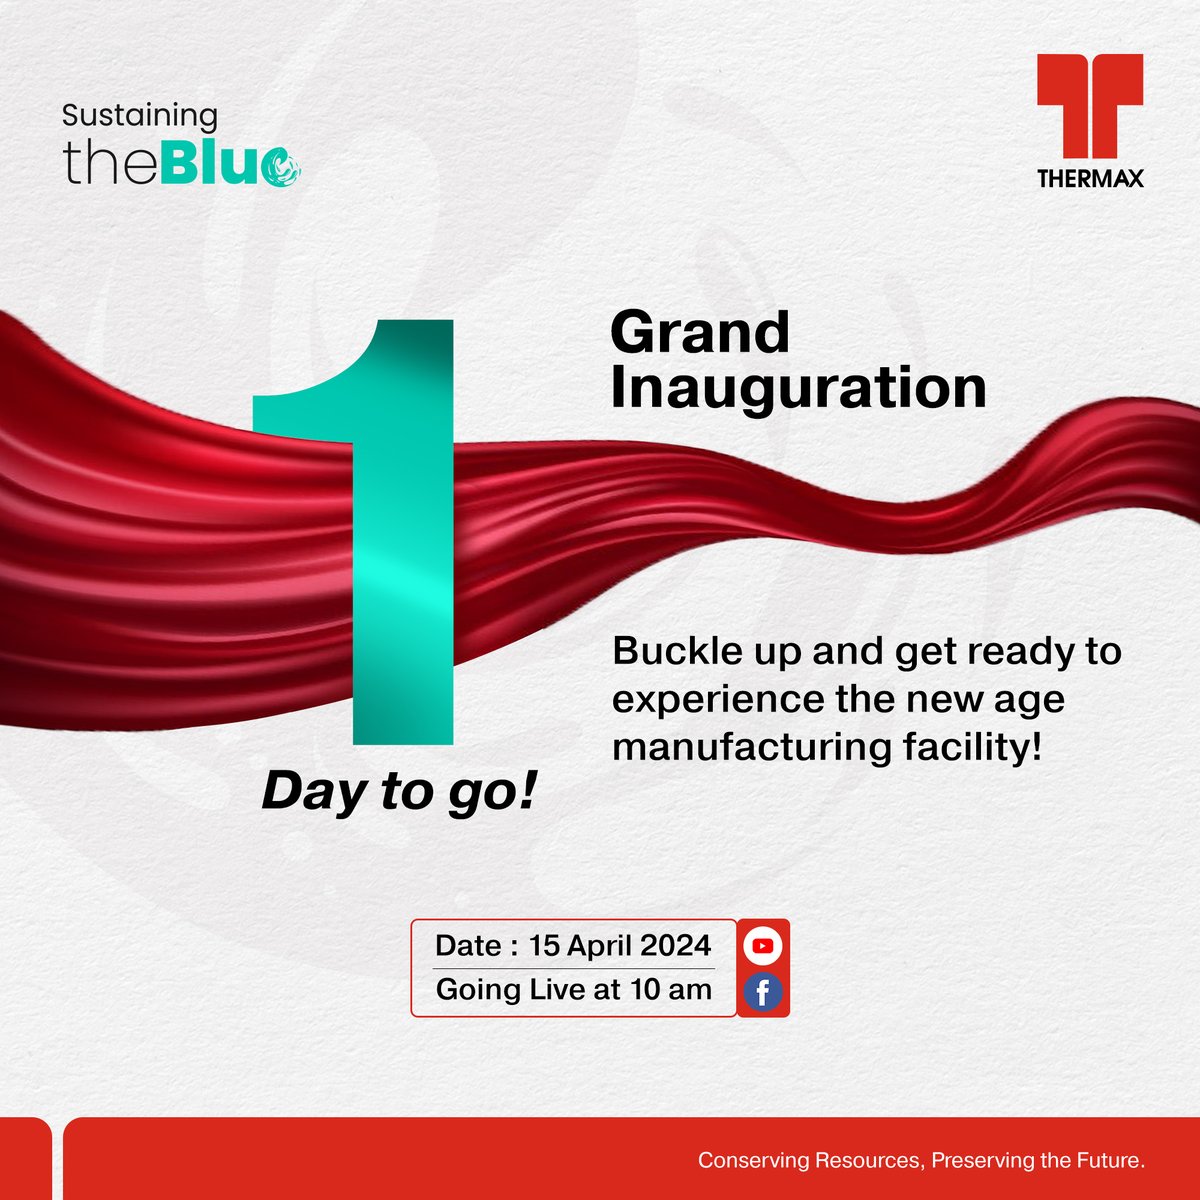 Stay tuned as we showcase our latest milestone in the journey of sustaining the blue with our new age manufacturing facility! Crafting excellence in water and wastewater solutions.
Live link : bit.ly/3vFOz9L

 #Cleanwater #Factoryinauguration #Watertreatment #Thermax